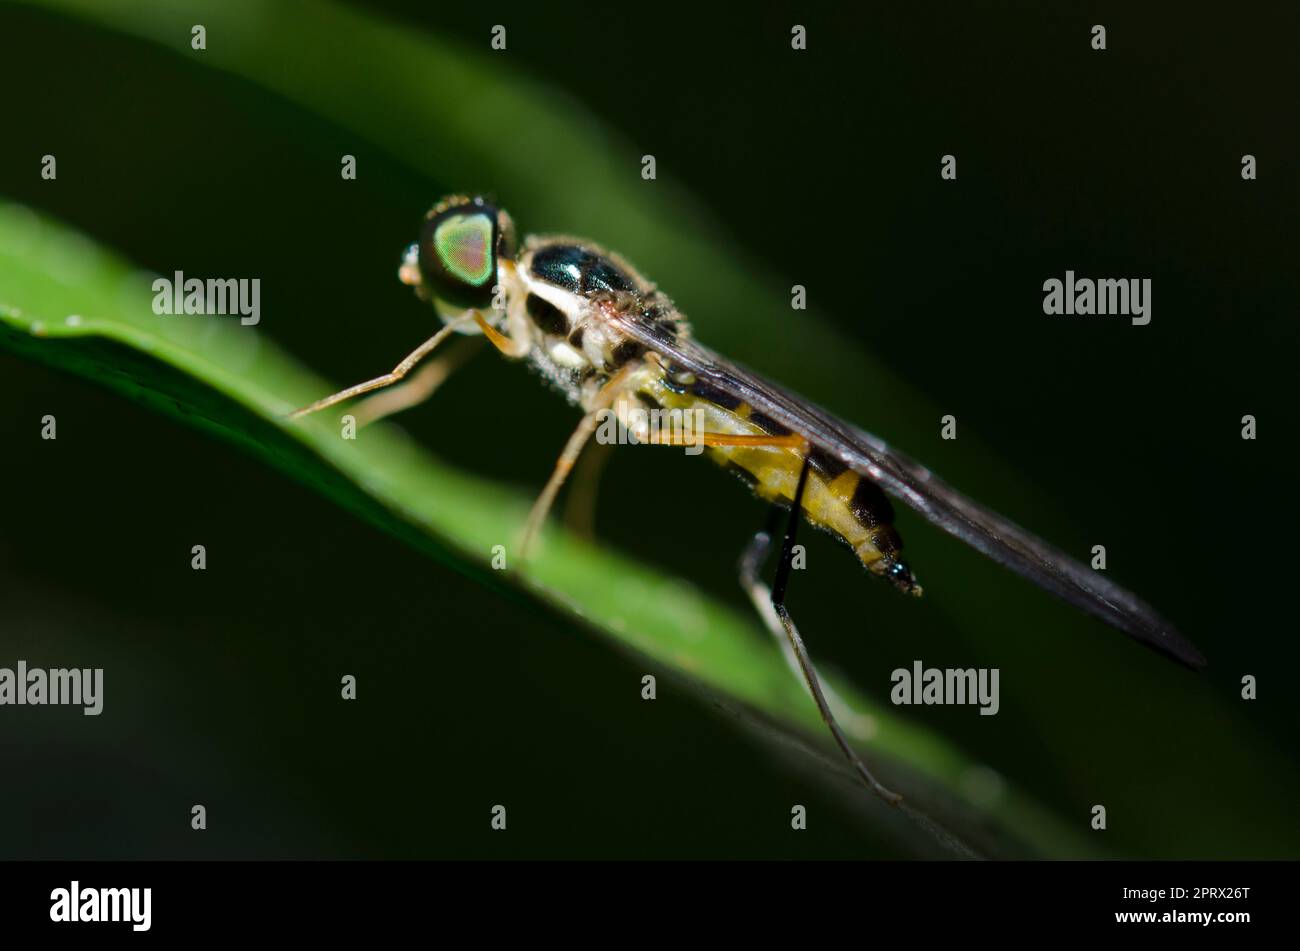 Soldier Fly, Stratiomyidae Family, on leaf, Klungkung, Bali, Indonesia Stock Photo